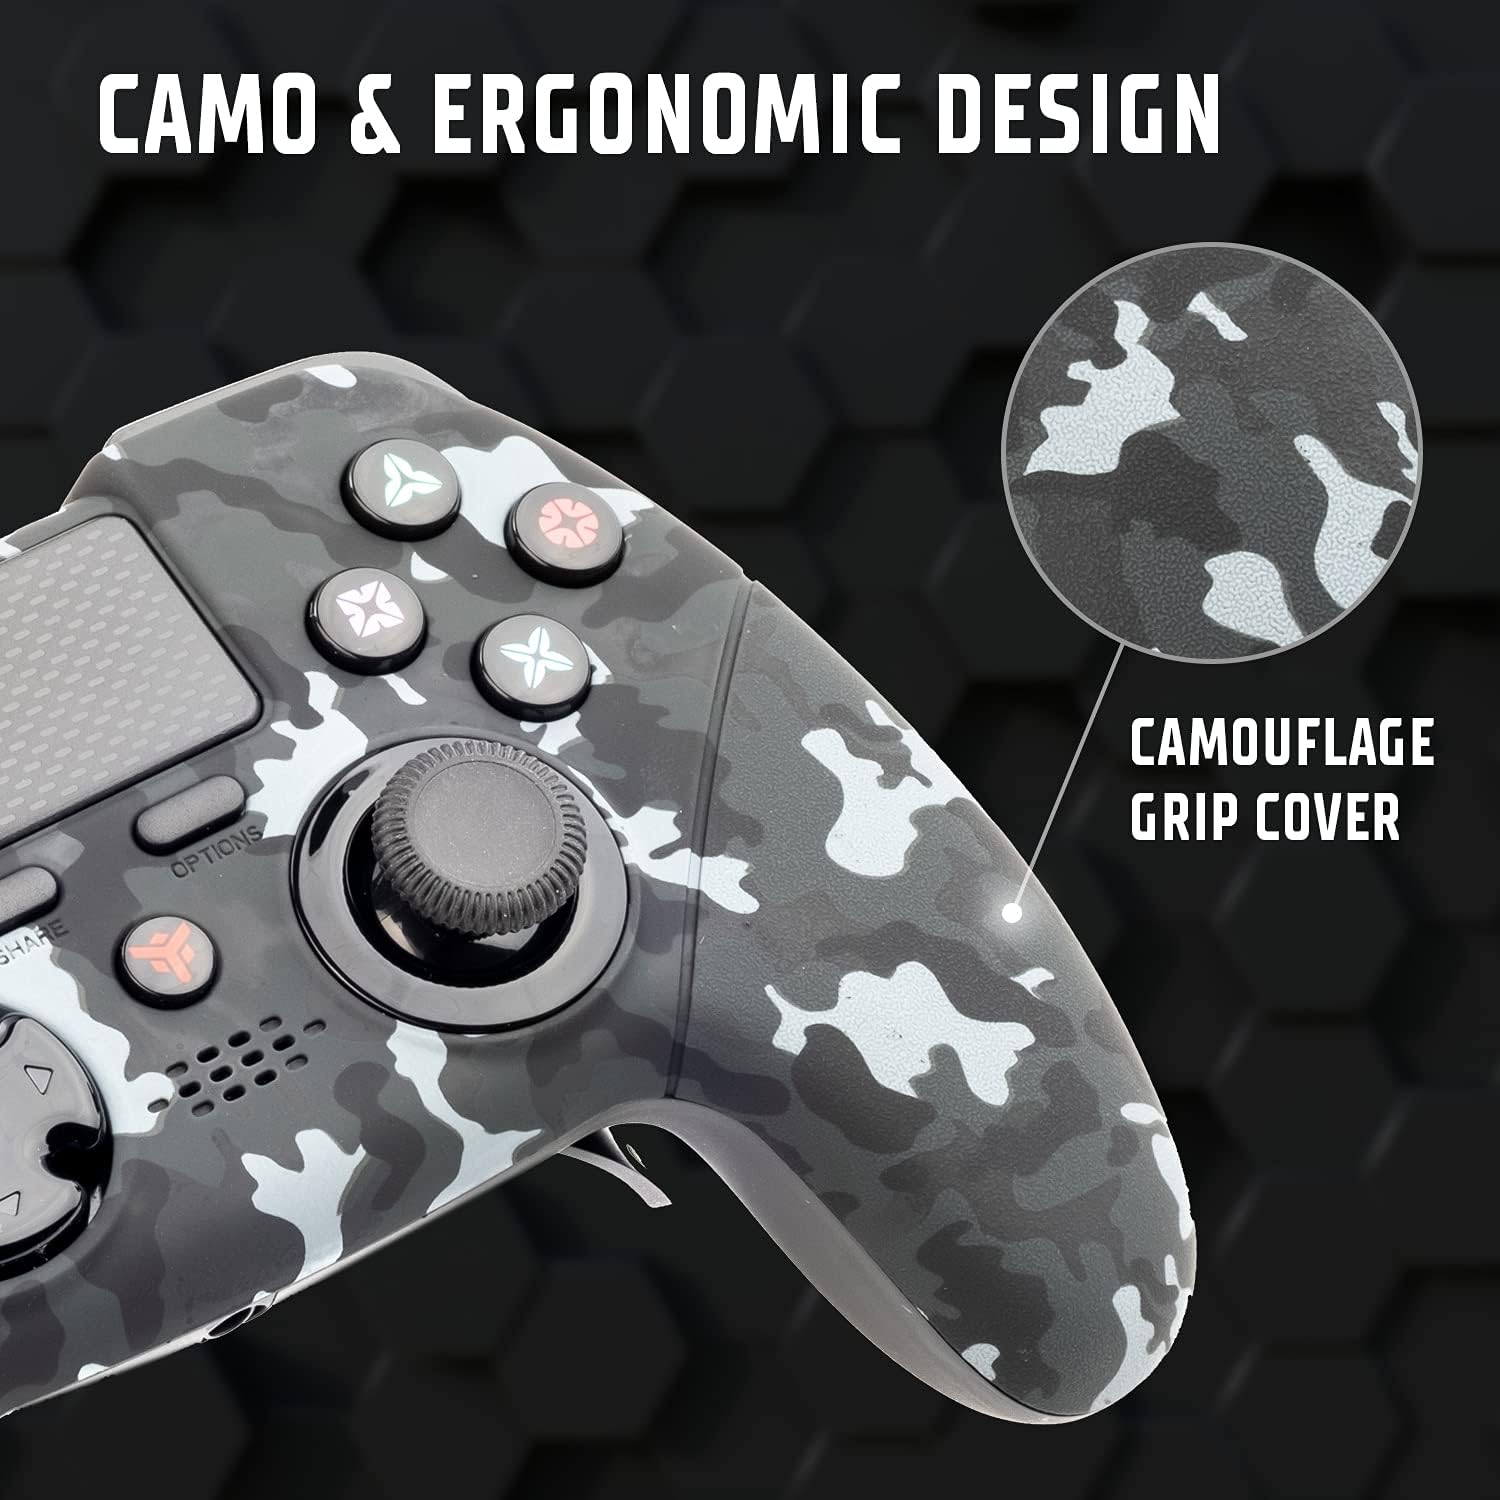 MANETTE DE GAMEPAD PC, PS4, Bluetooth, DualShock, touches Progr, TouchPad Axis6, CAMO 